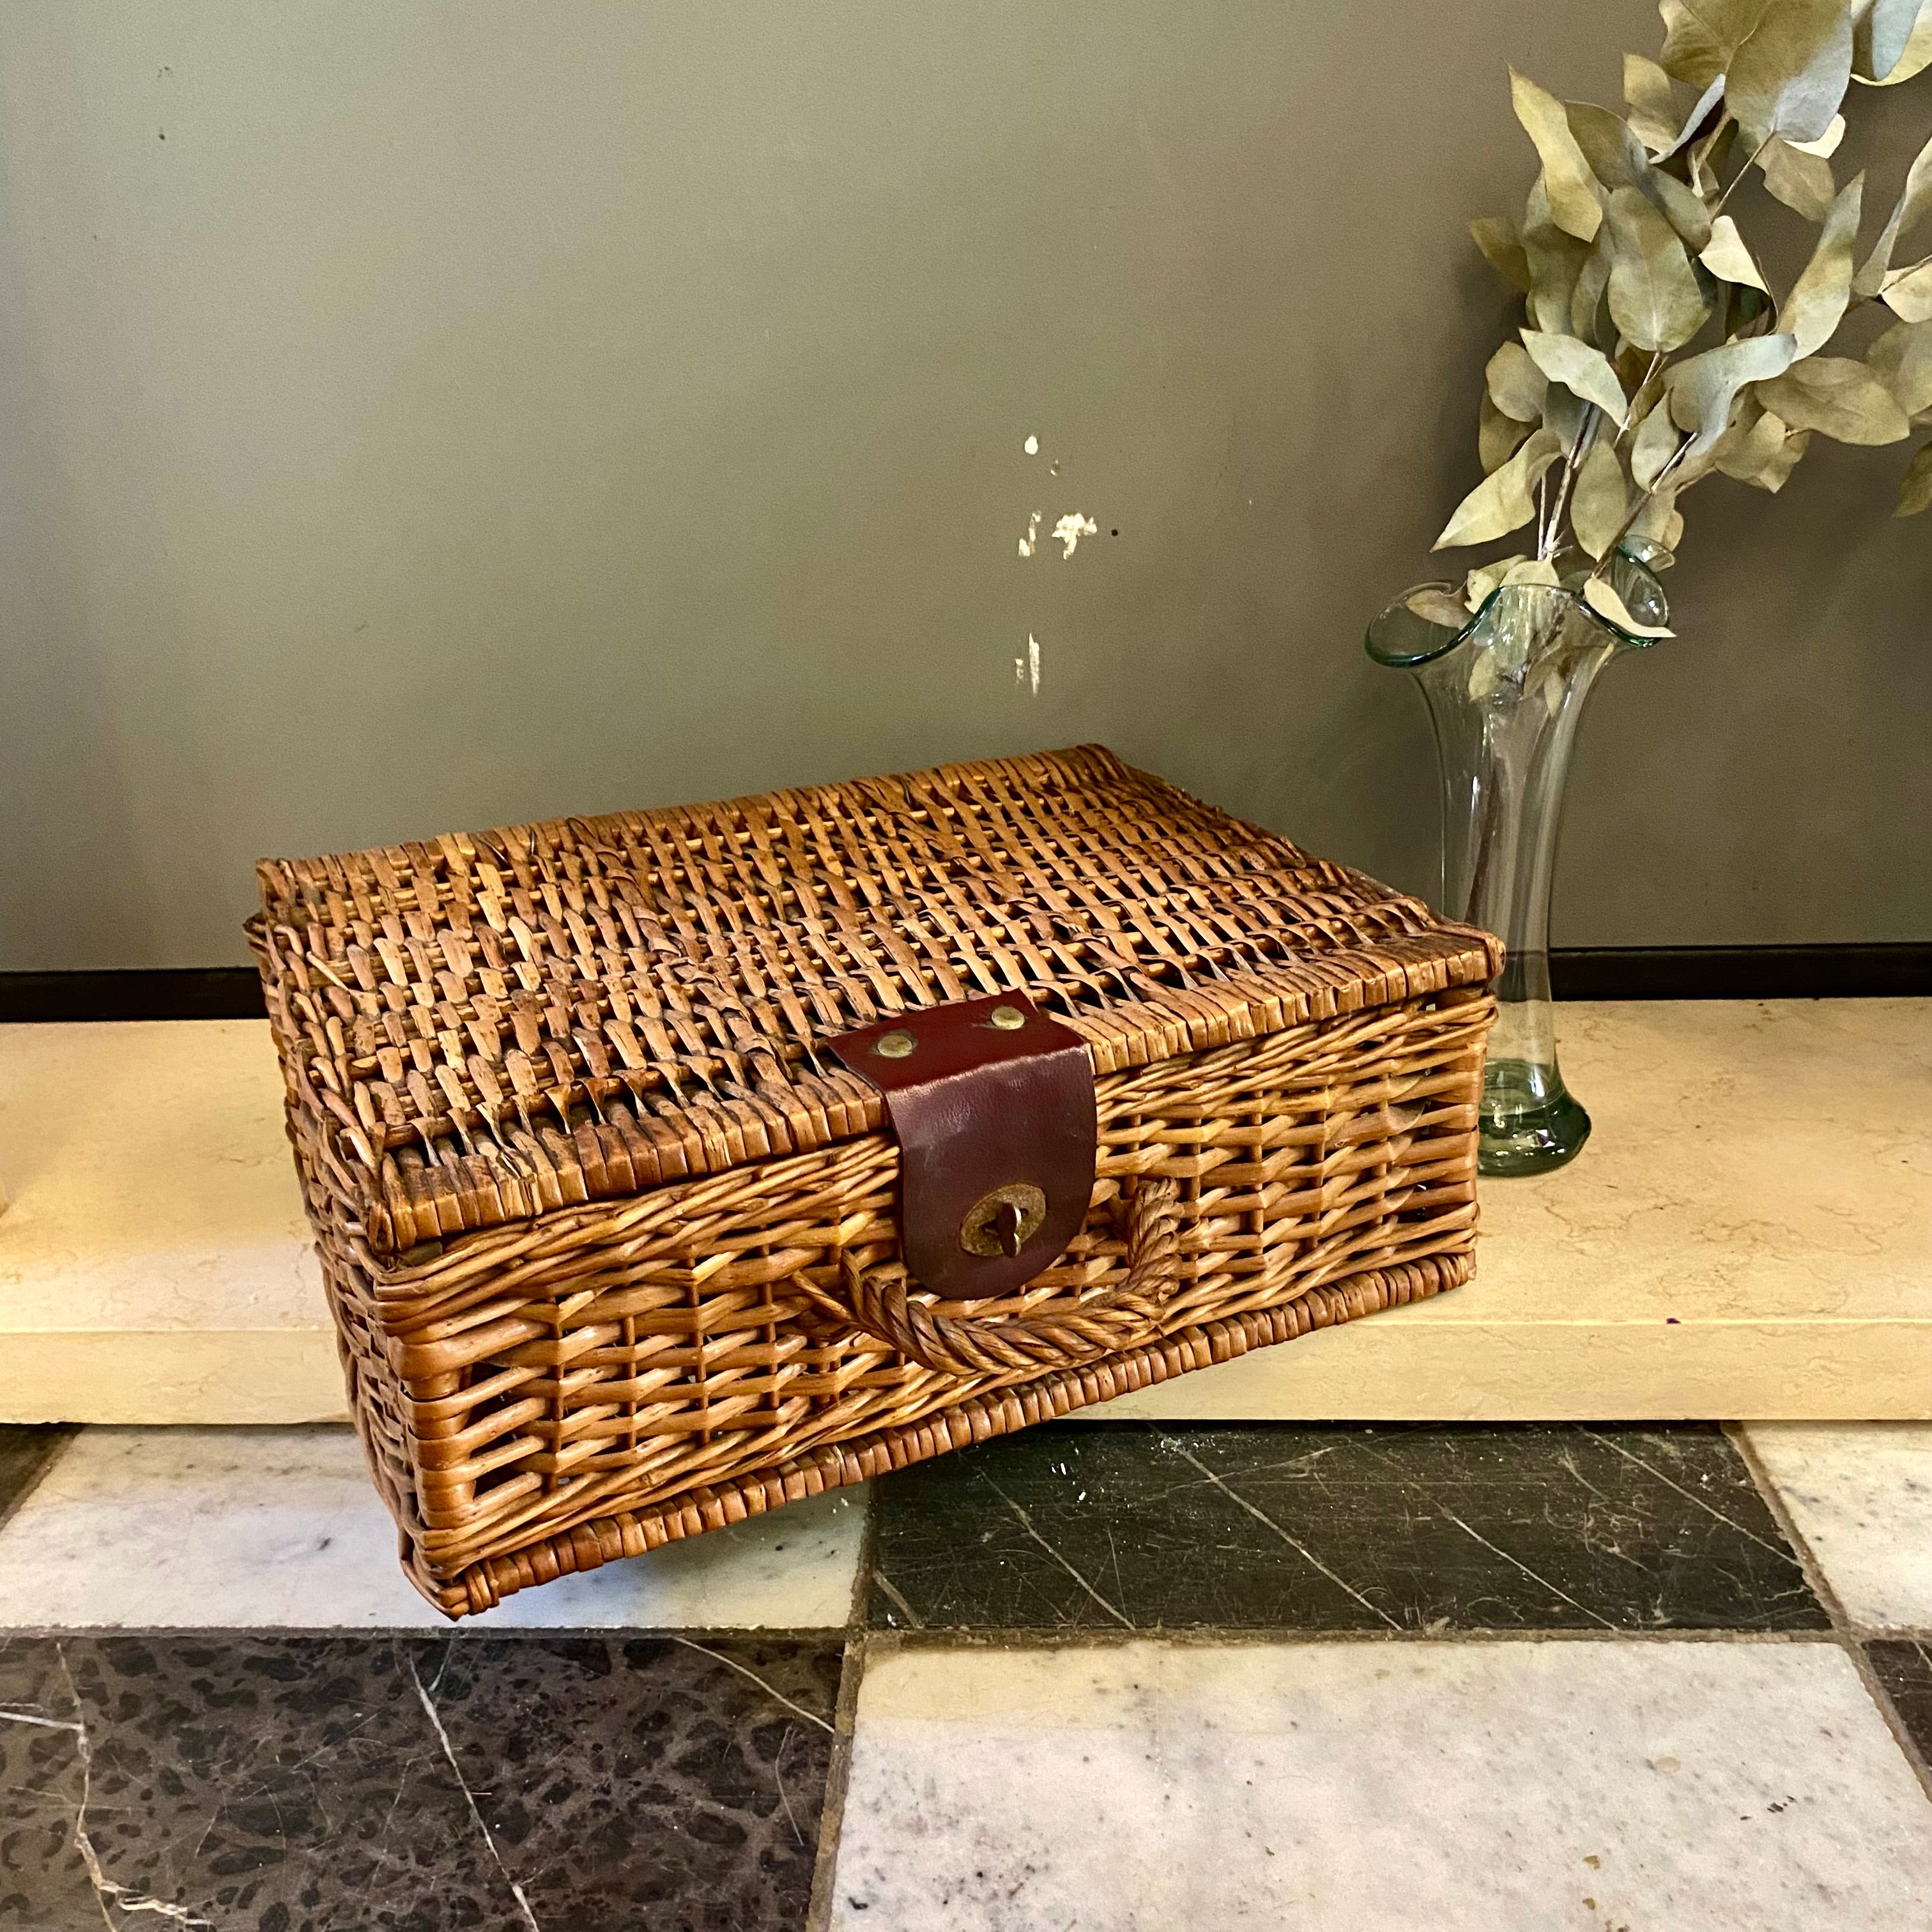 Sweet Vintage Wicker and Leather Clasp Picnic Basket - SOLD